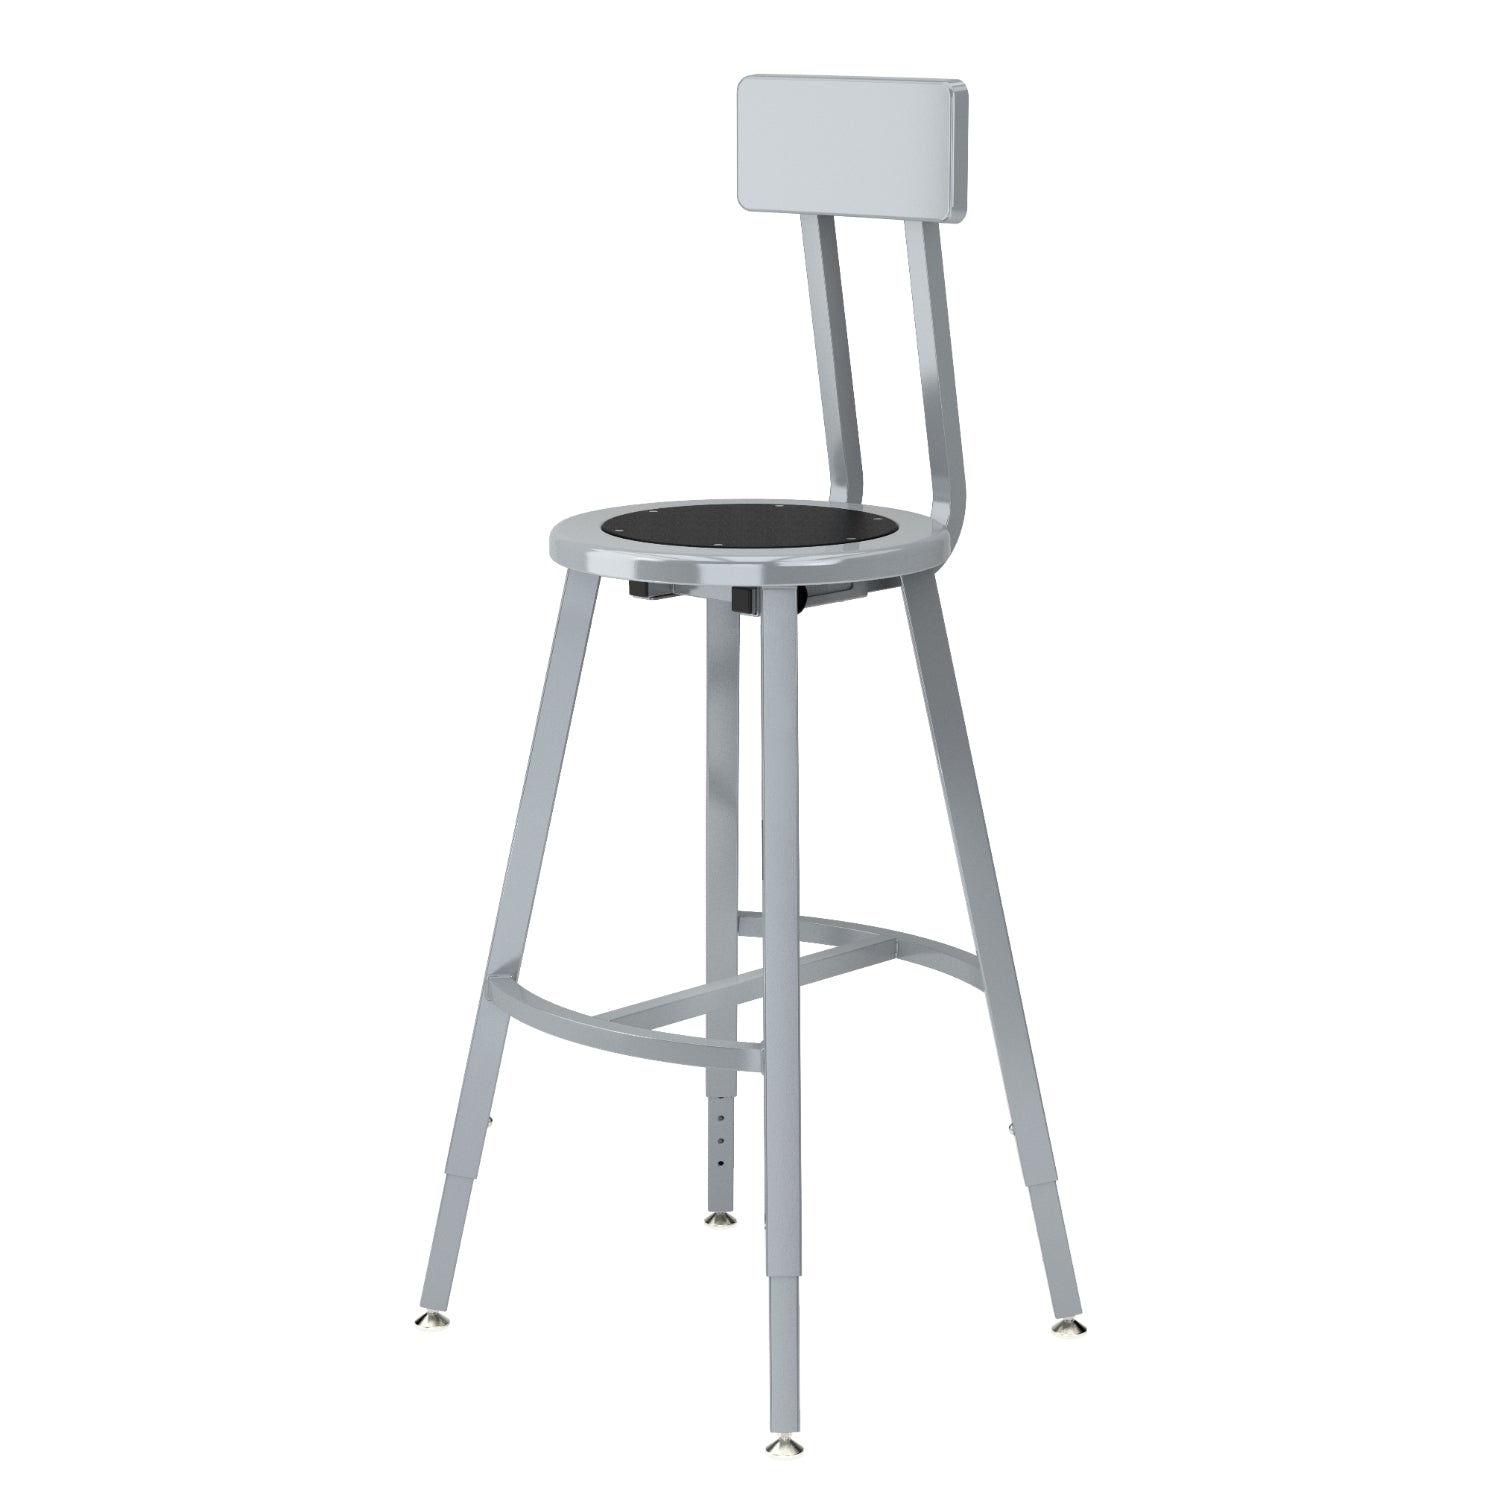 Titan Adjustable Height Stool with Backrest, Steel Seat with Black Poly Center, 24-32" Seat Height